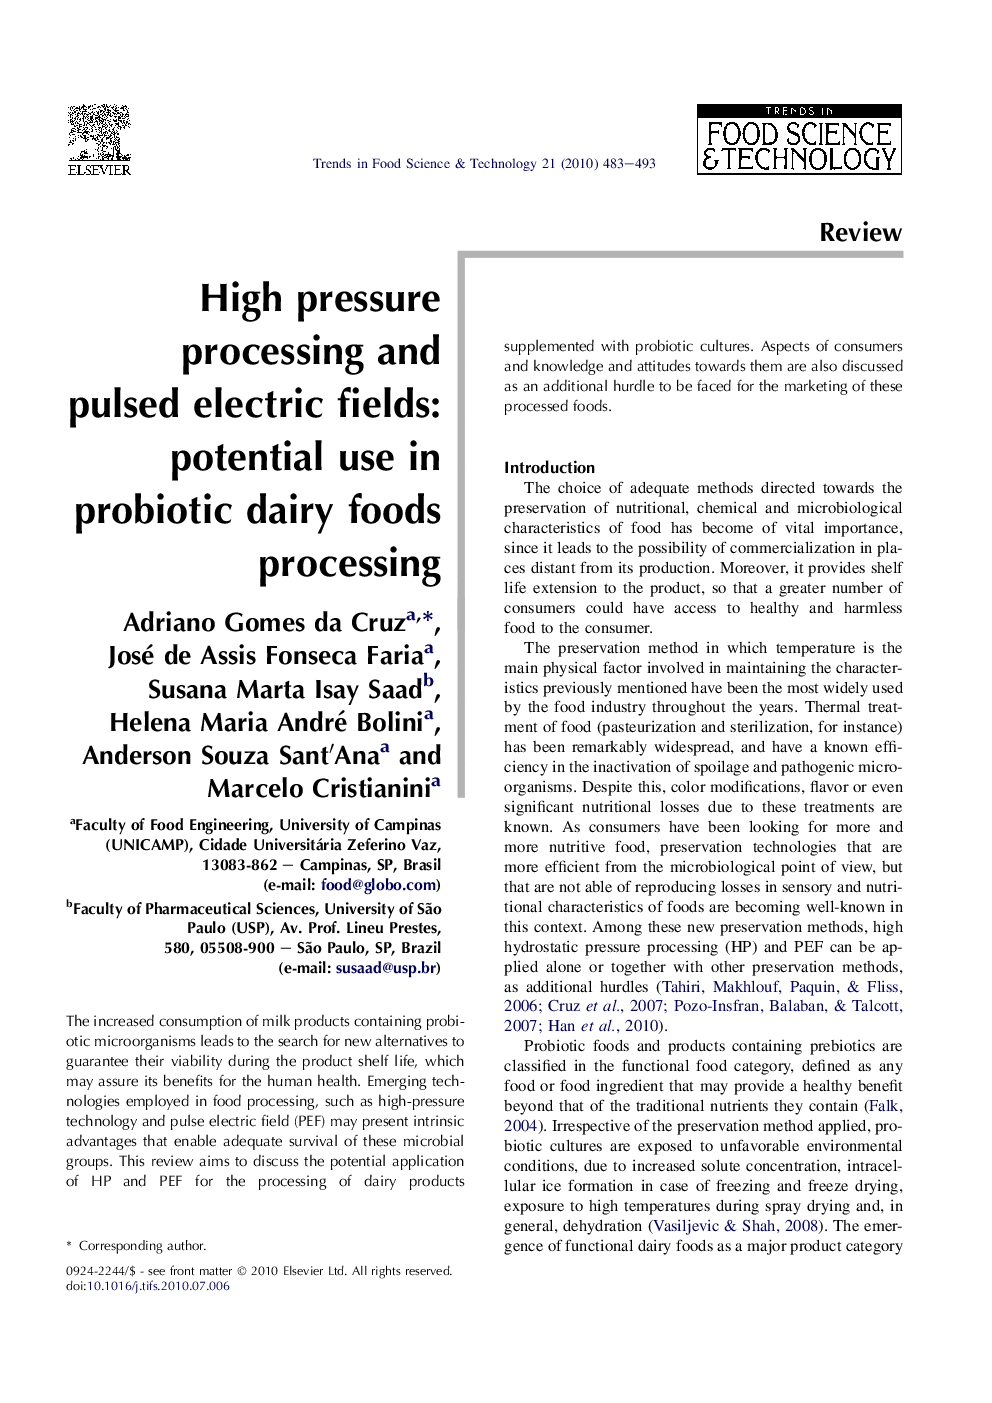 High pressure processing and pulsed electric fields: potential use in probiotic dairy foods processing